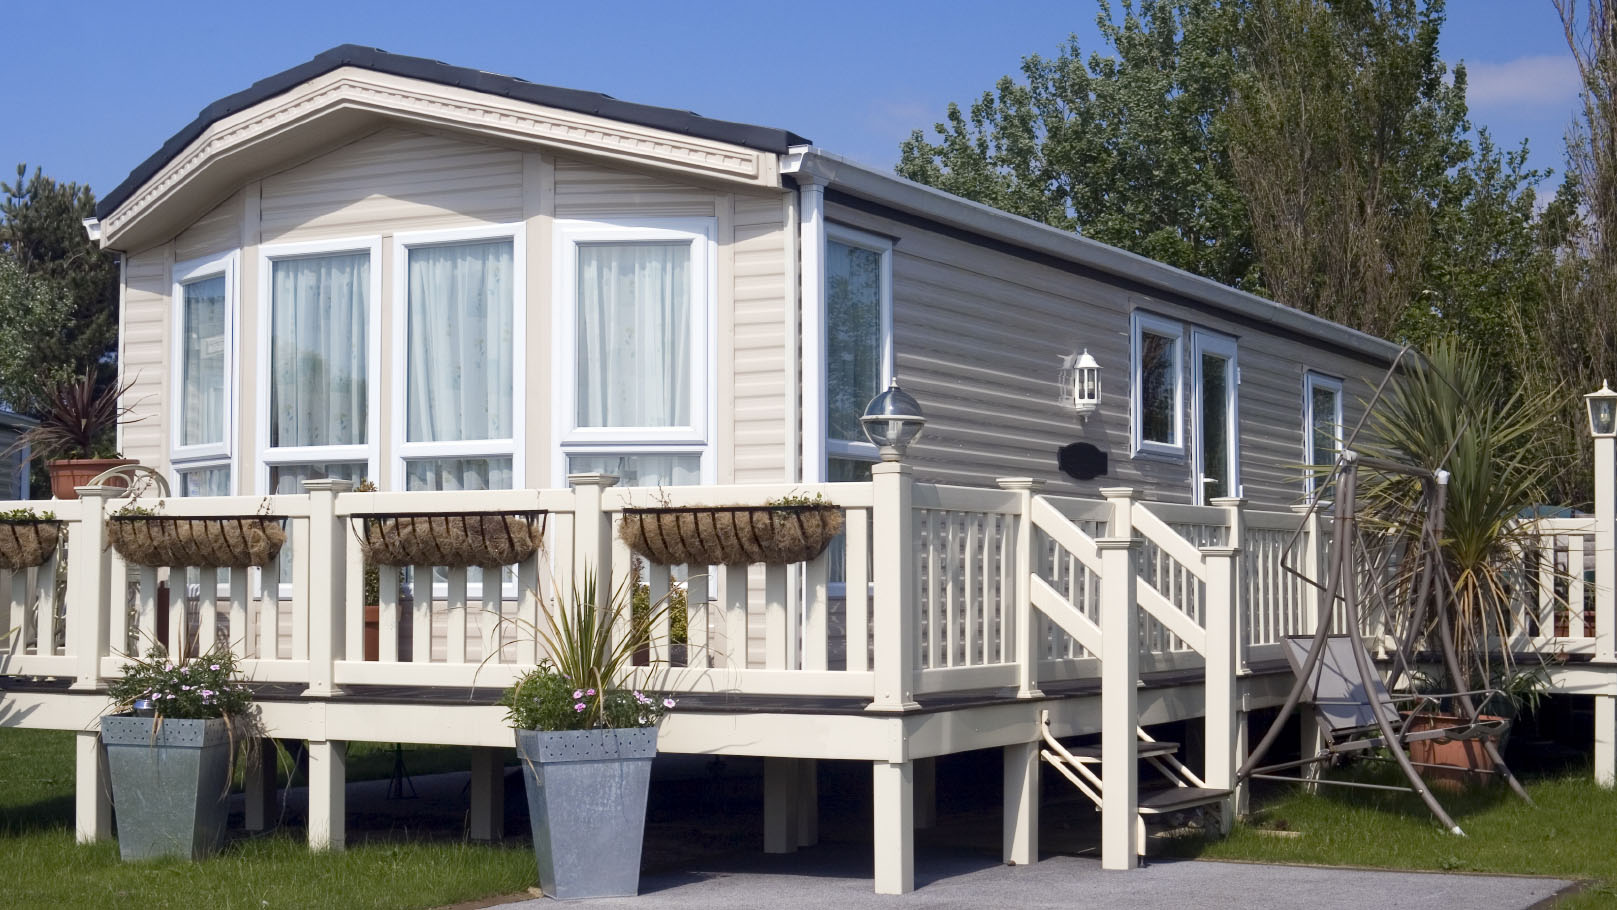 Mobile Homes For Rent Near Me Under $500, mobile homes for rent near me under $500 a month, mobile homes for rent near me under $500 orlando fl, mobile homes for rent near me under 500 nj, mobile homes for rent near me under 500 nc, mobile homes for sale near me under $500, mobile homes for sale near me under 5000, mobile homes for rent under 500,